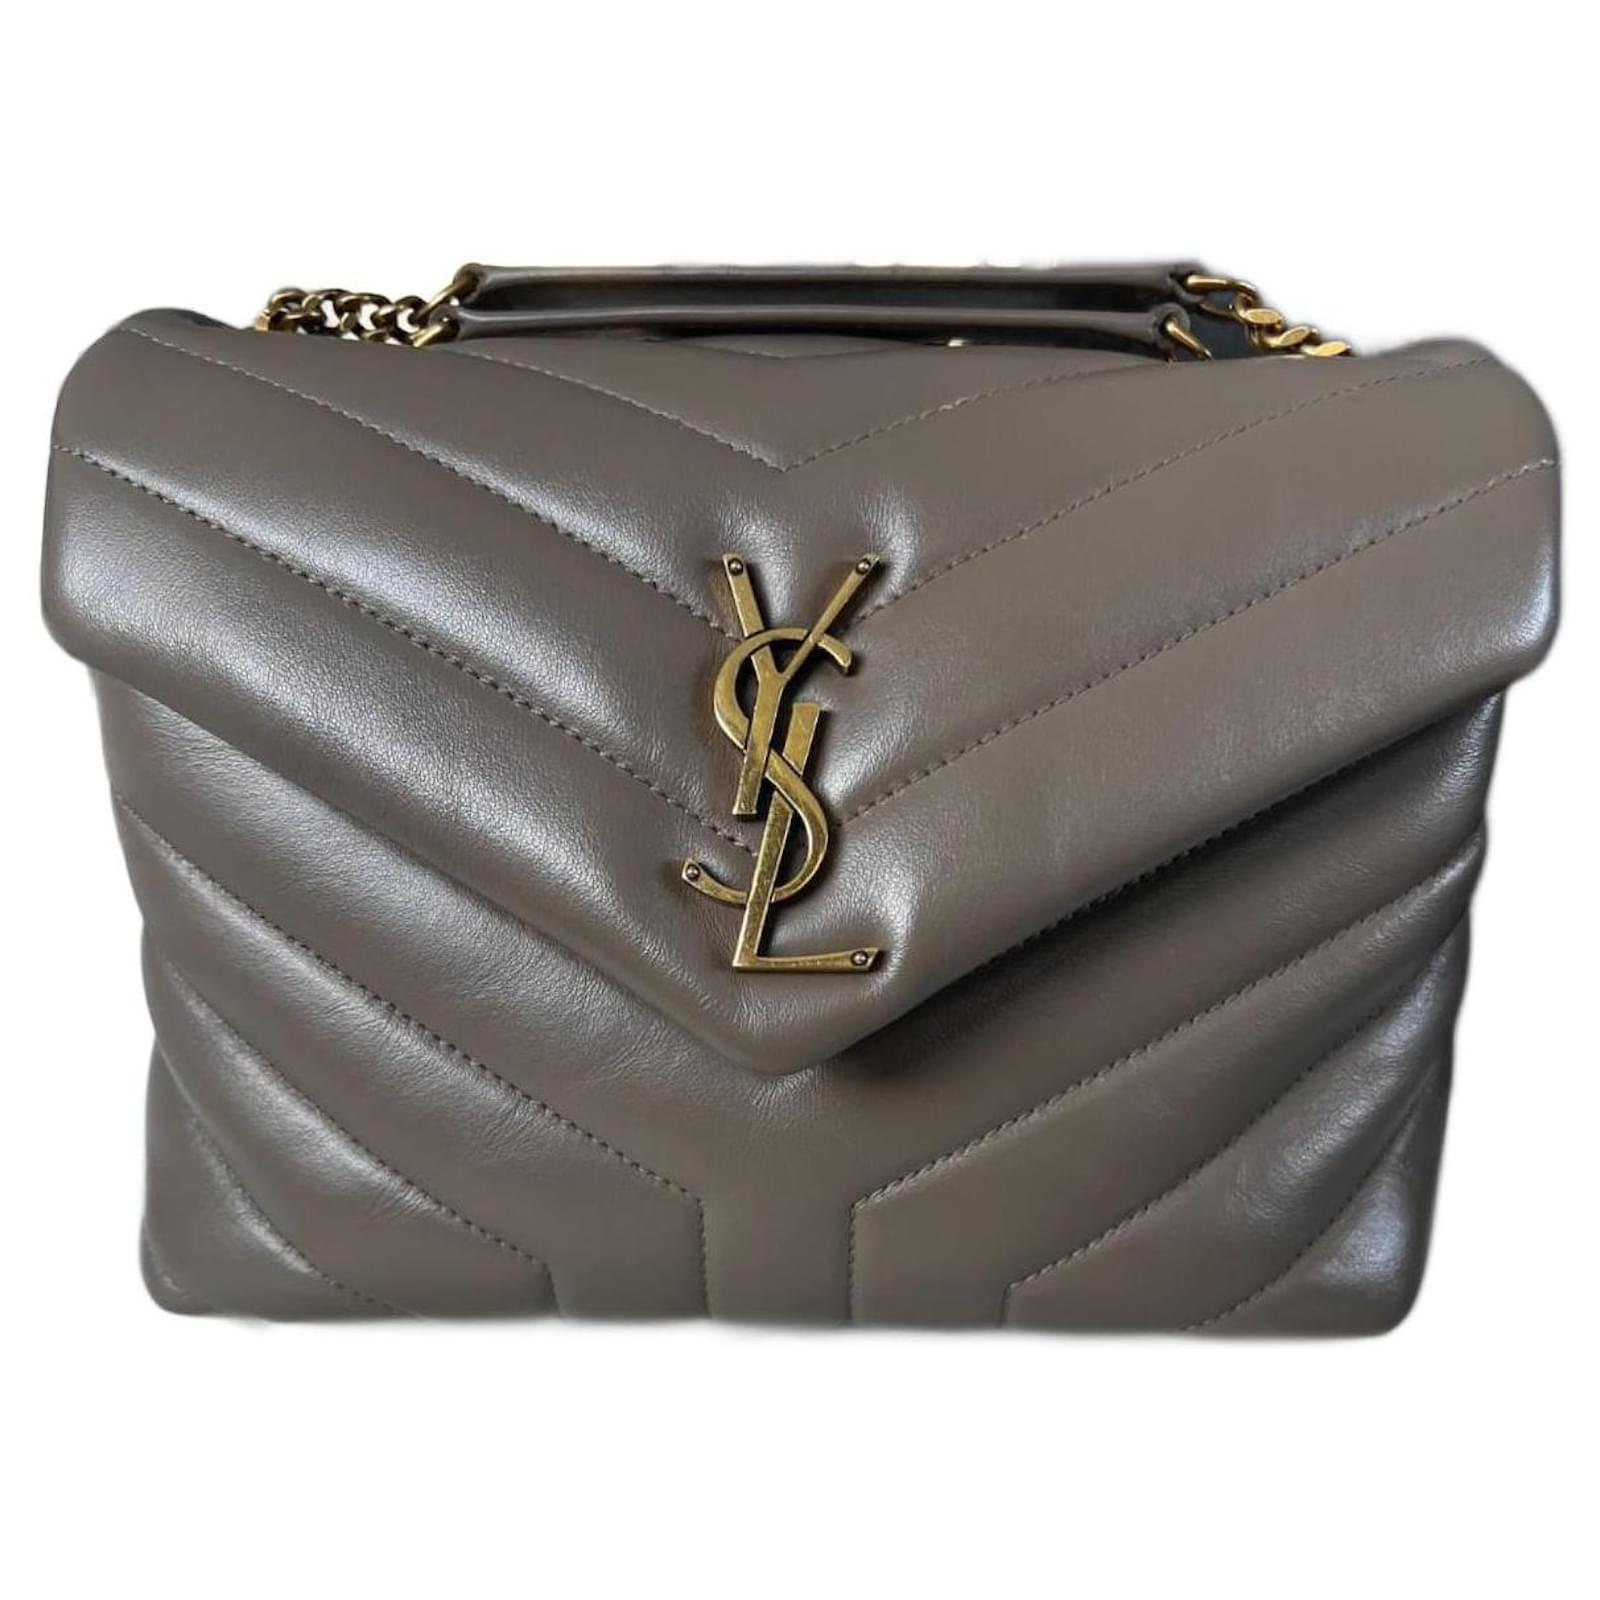 ysl loulou small